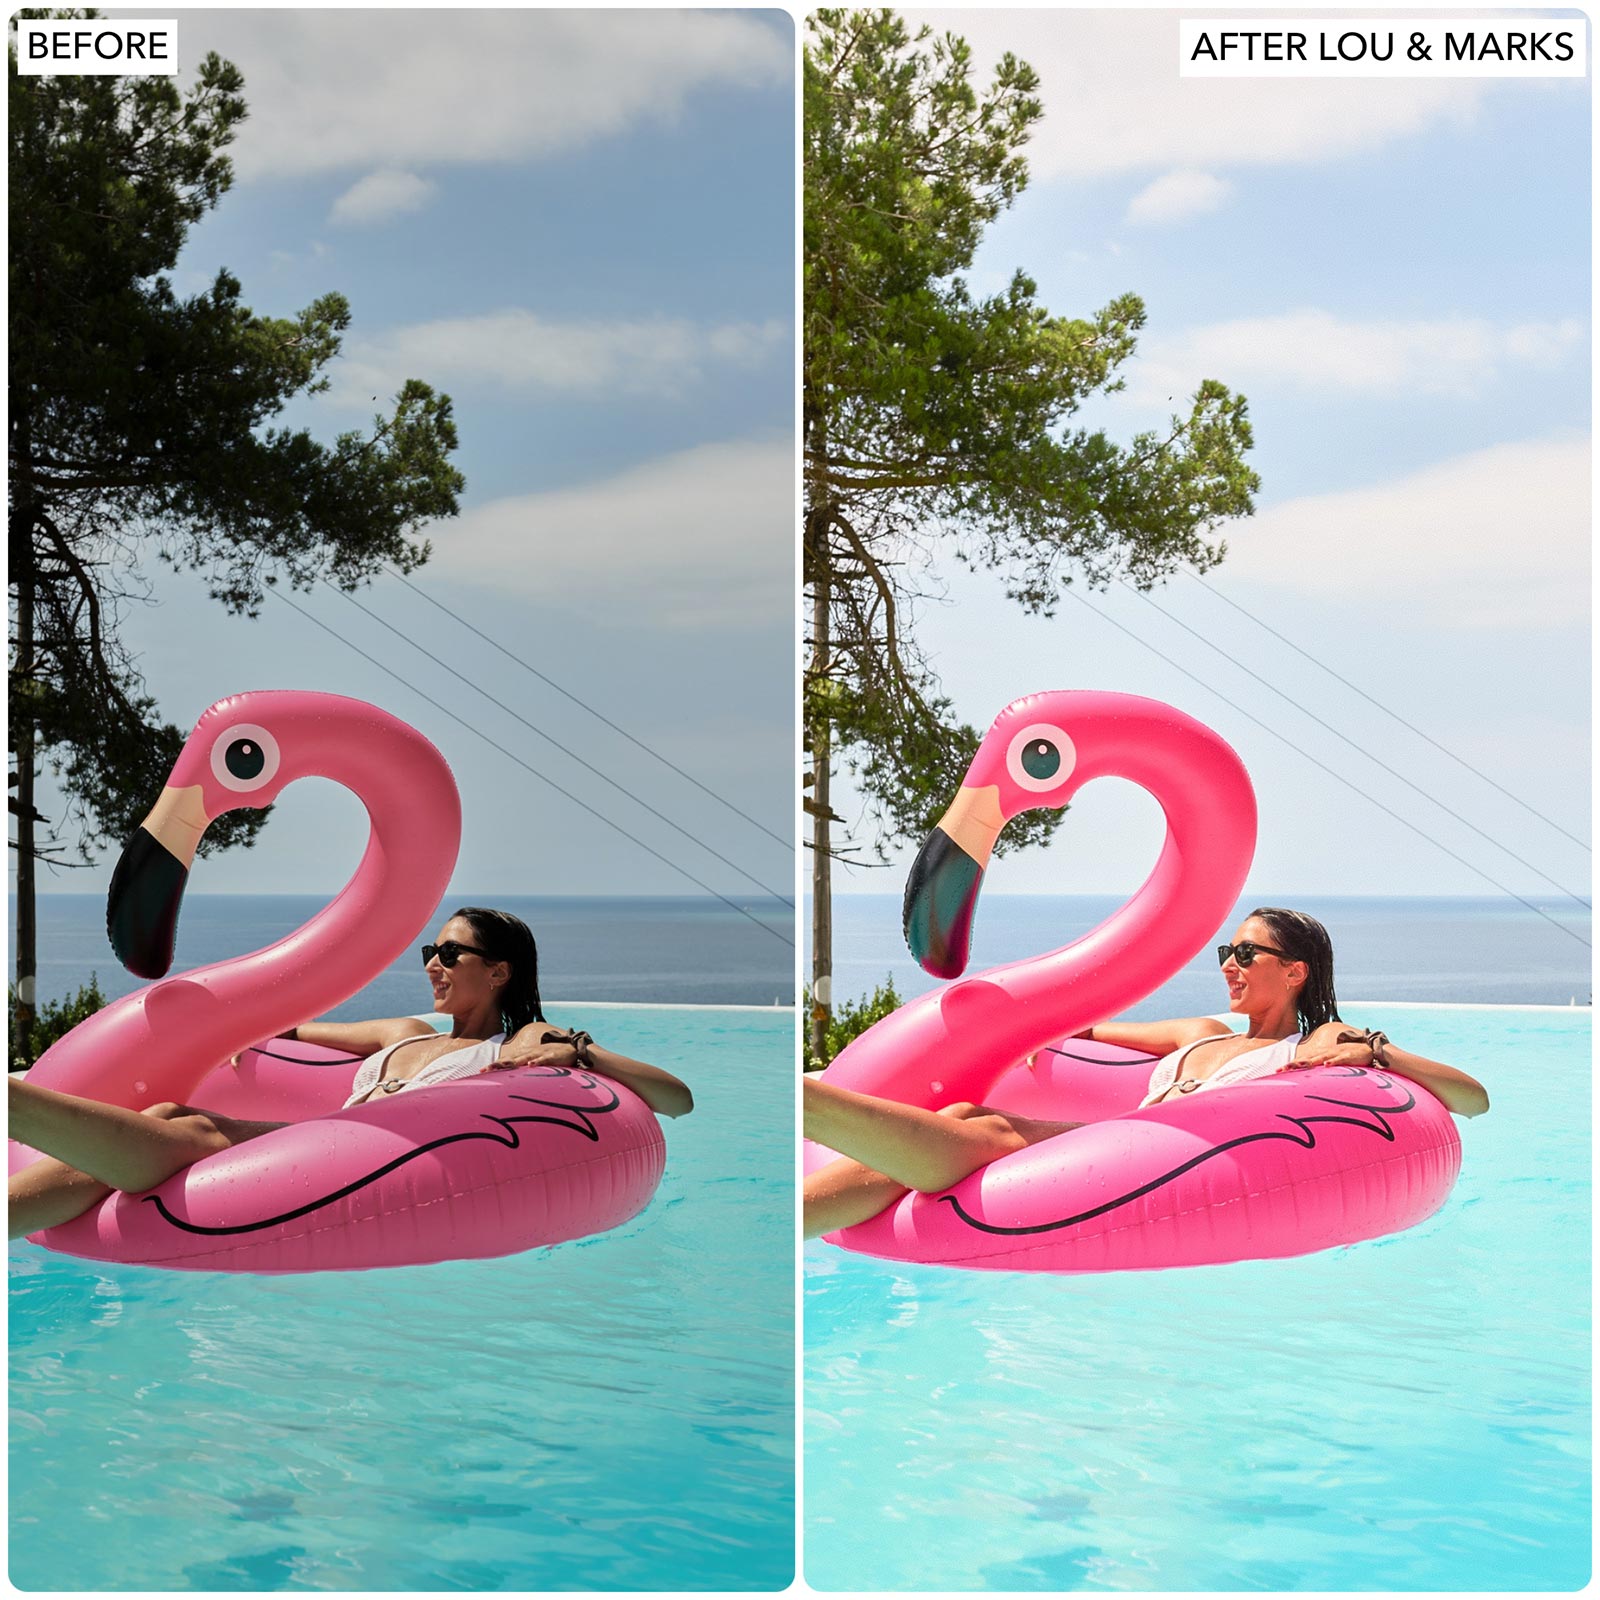 Top Rated Cali Summer Lightroom Presets The Best Photo Editing Preset Filters For Summer And Travel Colorful Photos With Lightroom Mobile And Desktop For Photographers and Instagram Influencers By Lou And Marks Presets